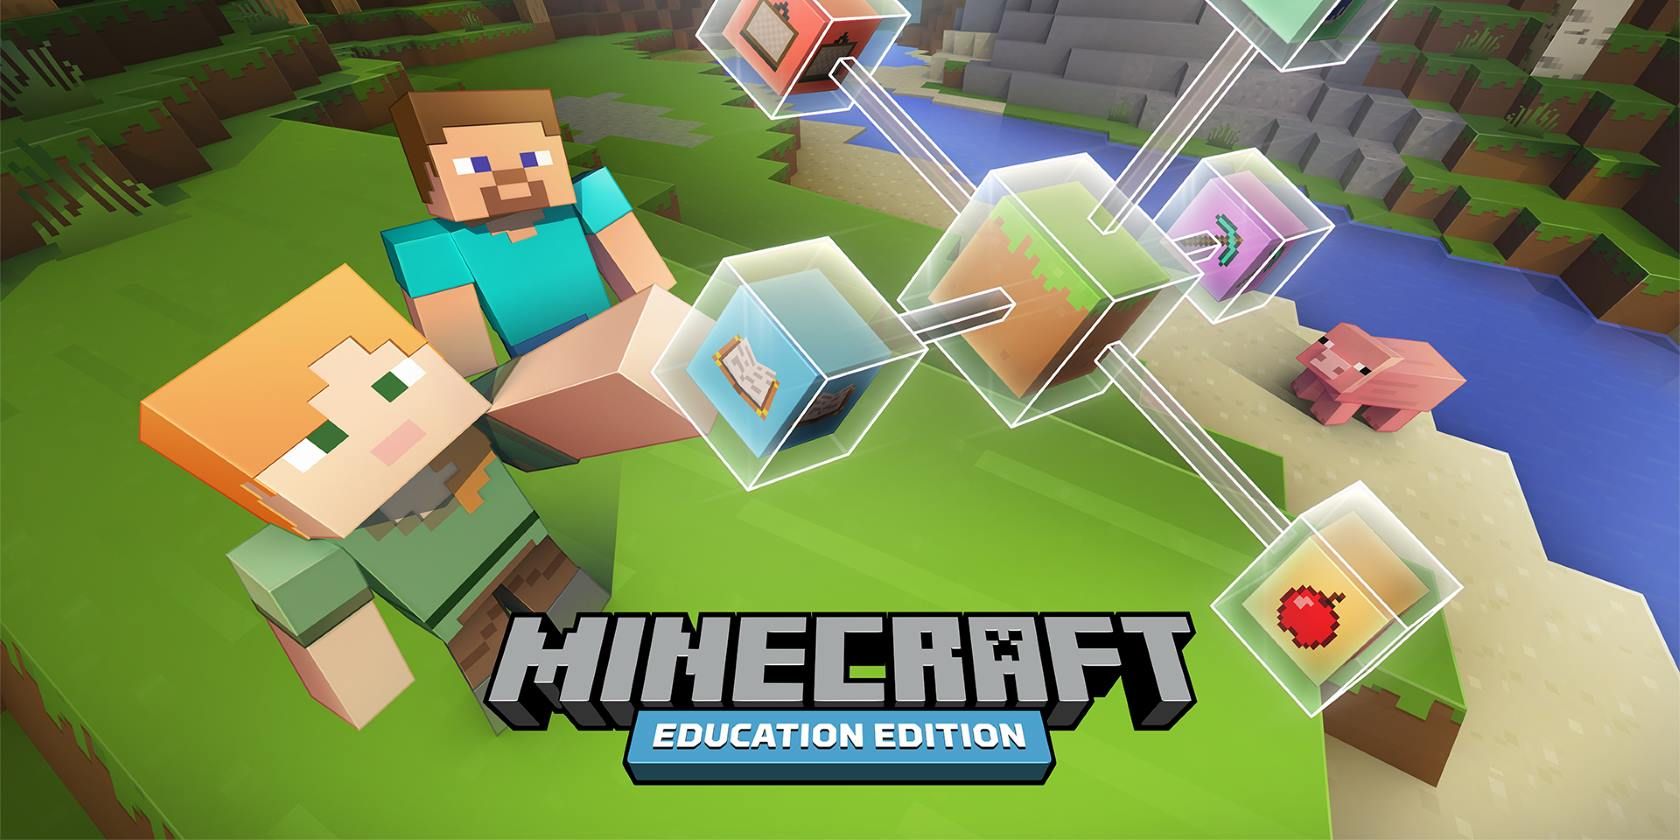 You Can Now Play Minecraft Education Edition on Chromebooks